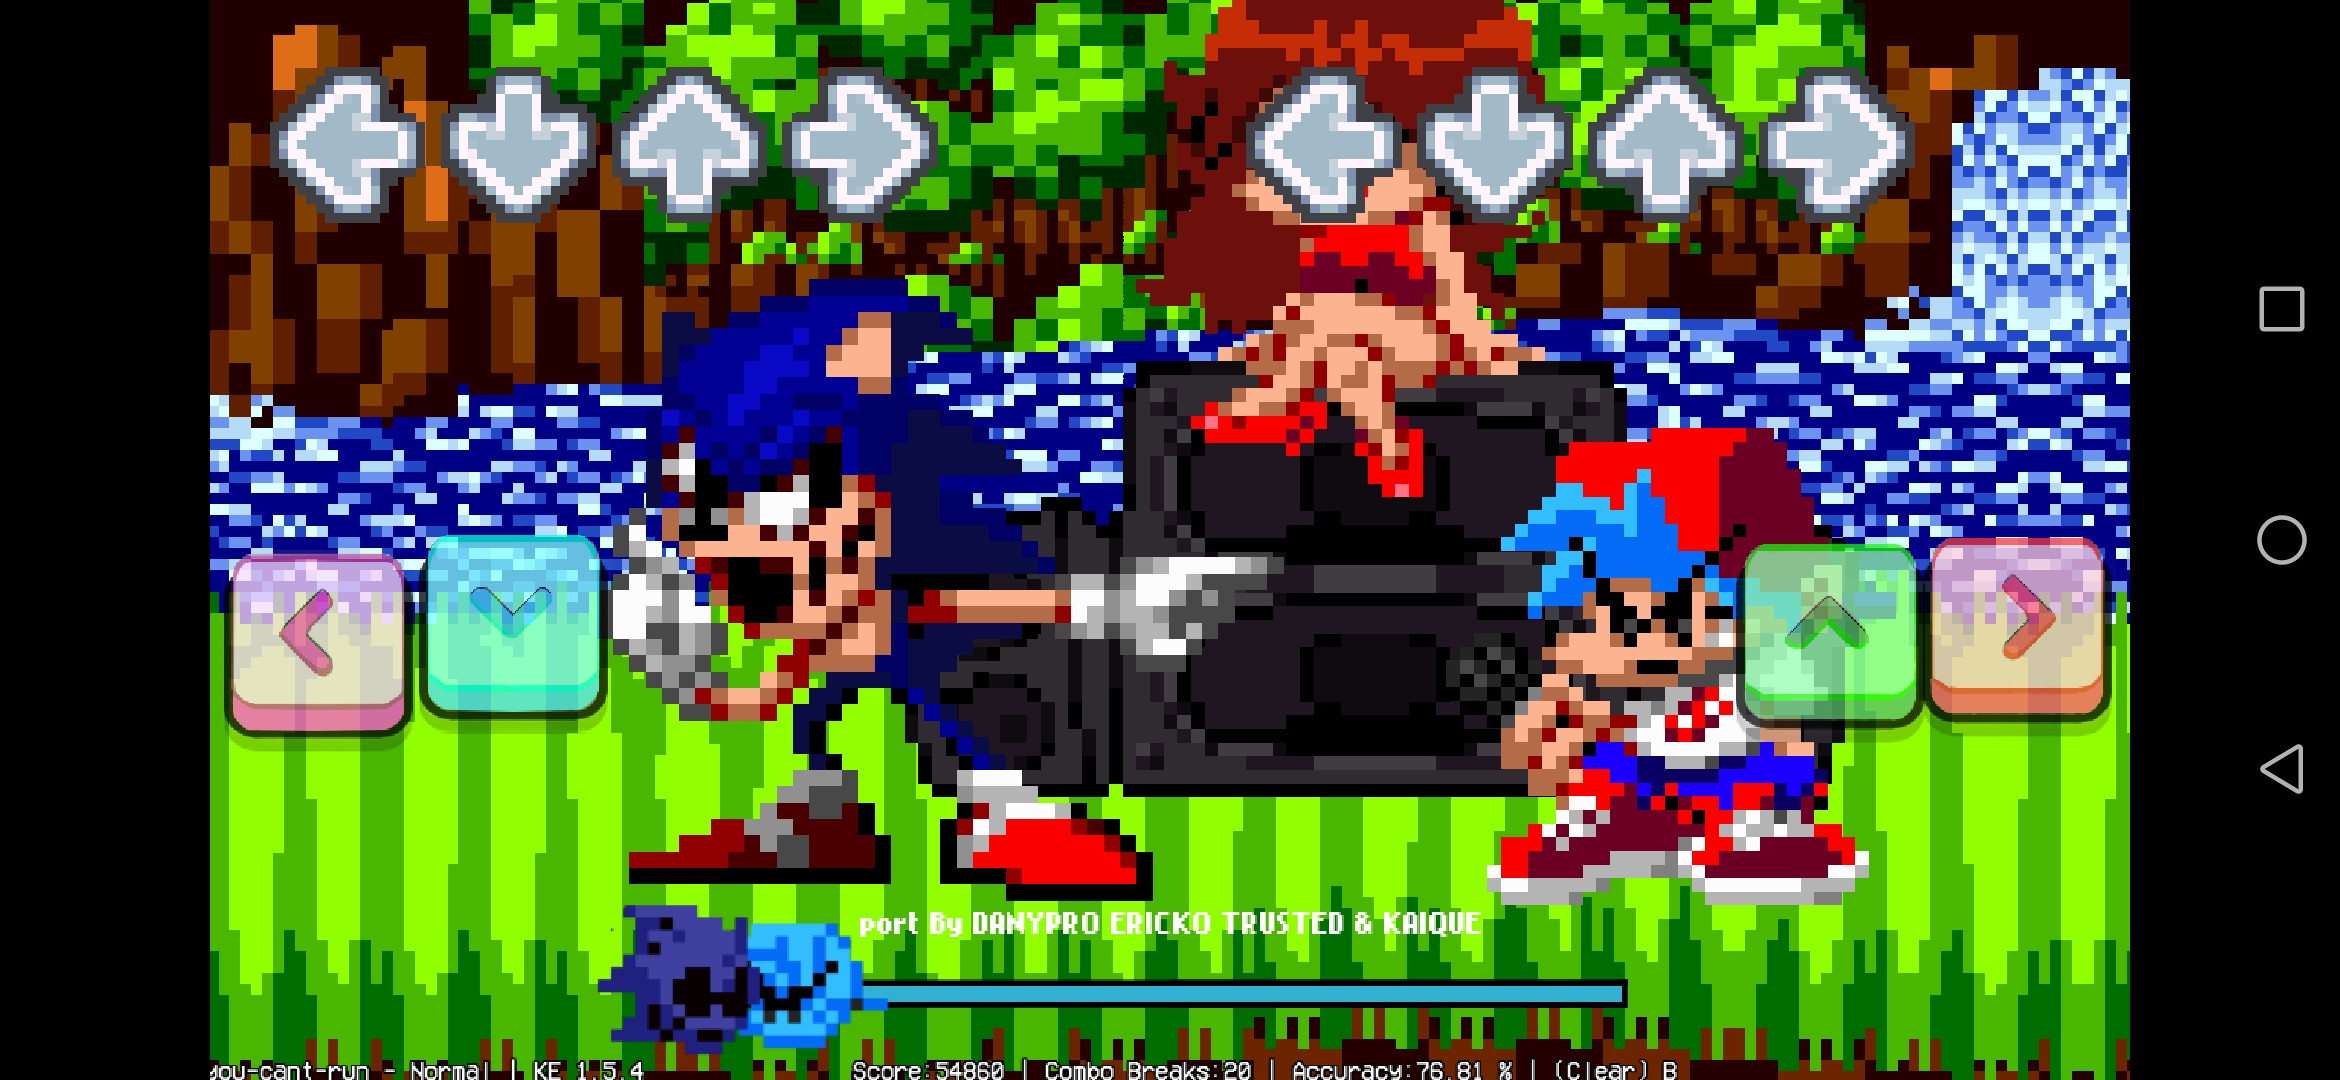 Sonic2.EXE - The Game by NovaWare - Game Jolt